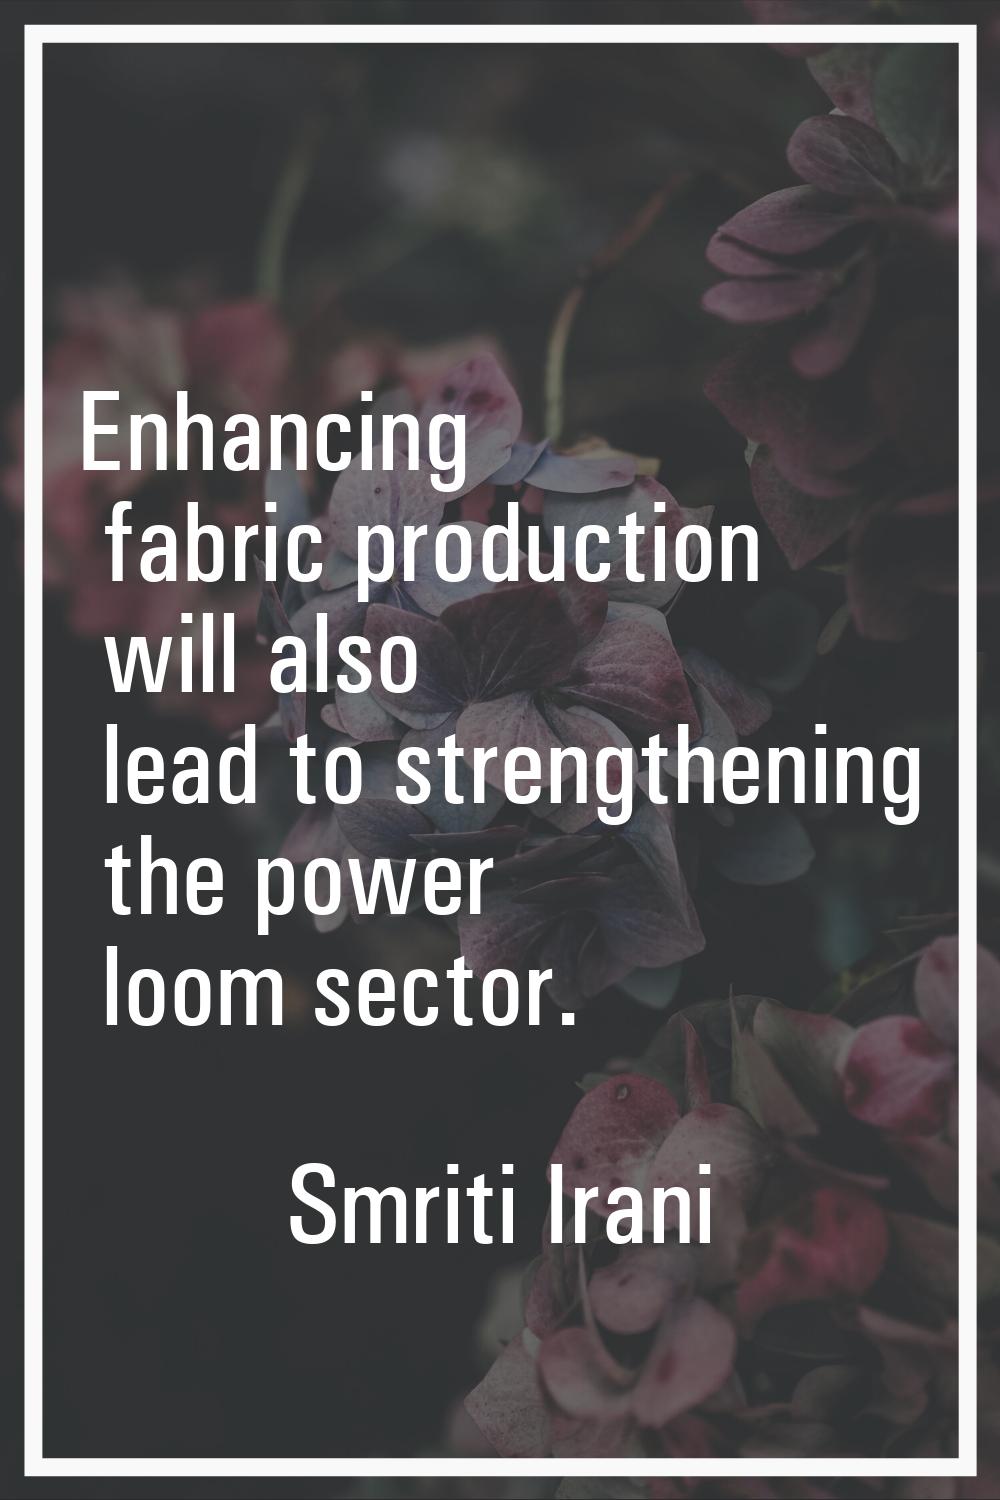 Enhancing fabric production will also lead to strengthening the power loom sector.